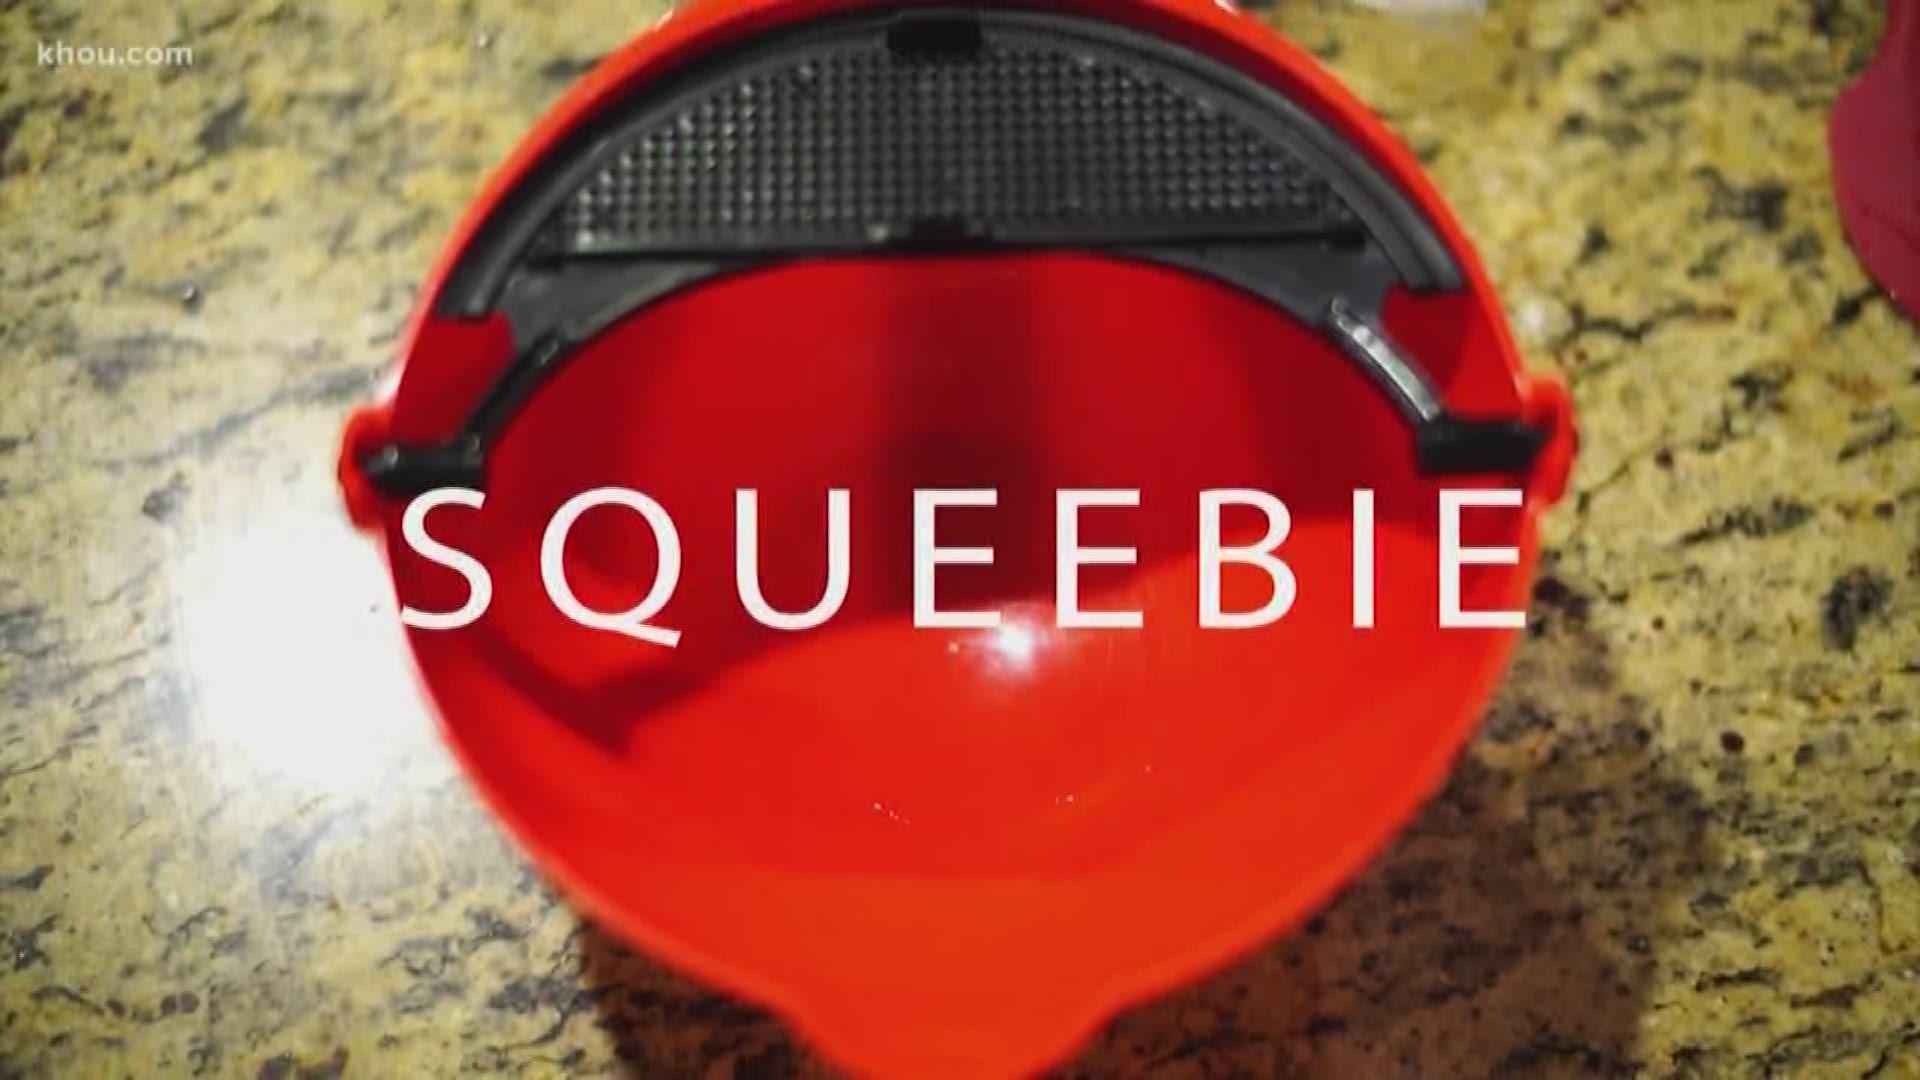 No one has a lot of extra space in the kitchen. So we're trying a multi-purpose mixing bowl called the Squeebie.